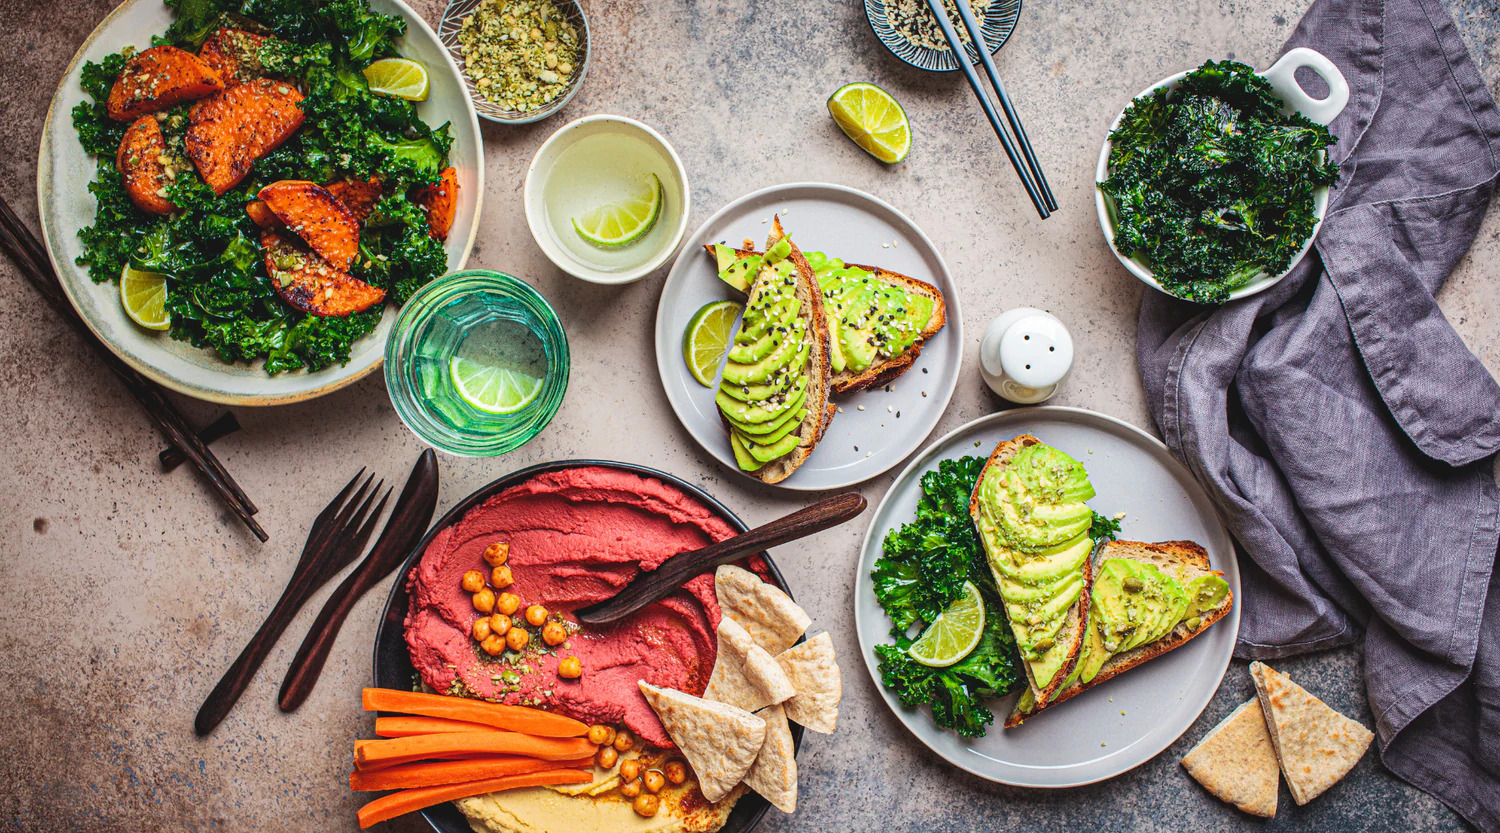 11 STEPS TO TRANSITION TO A PLANT-BASED DIET